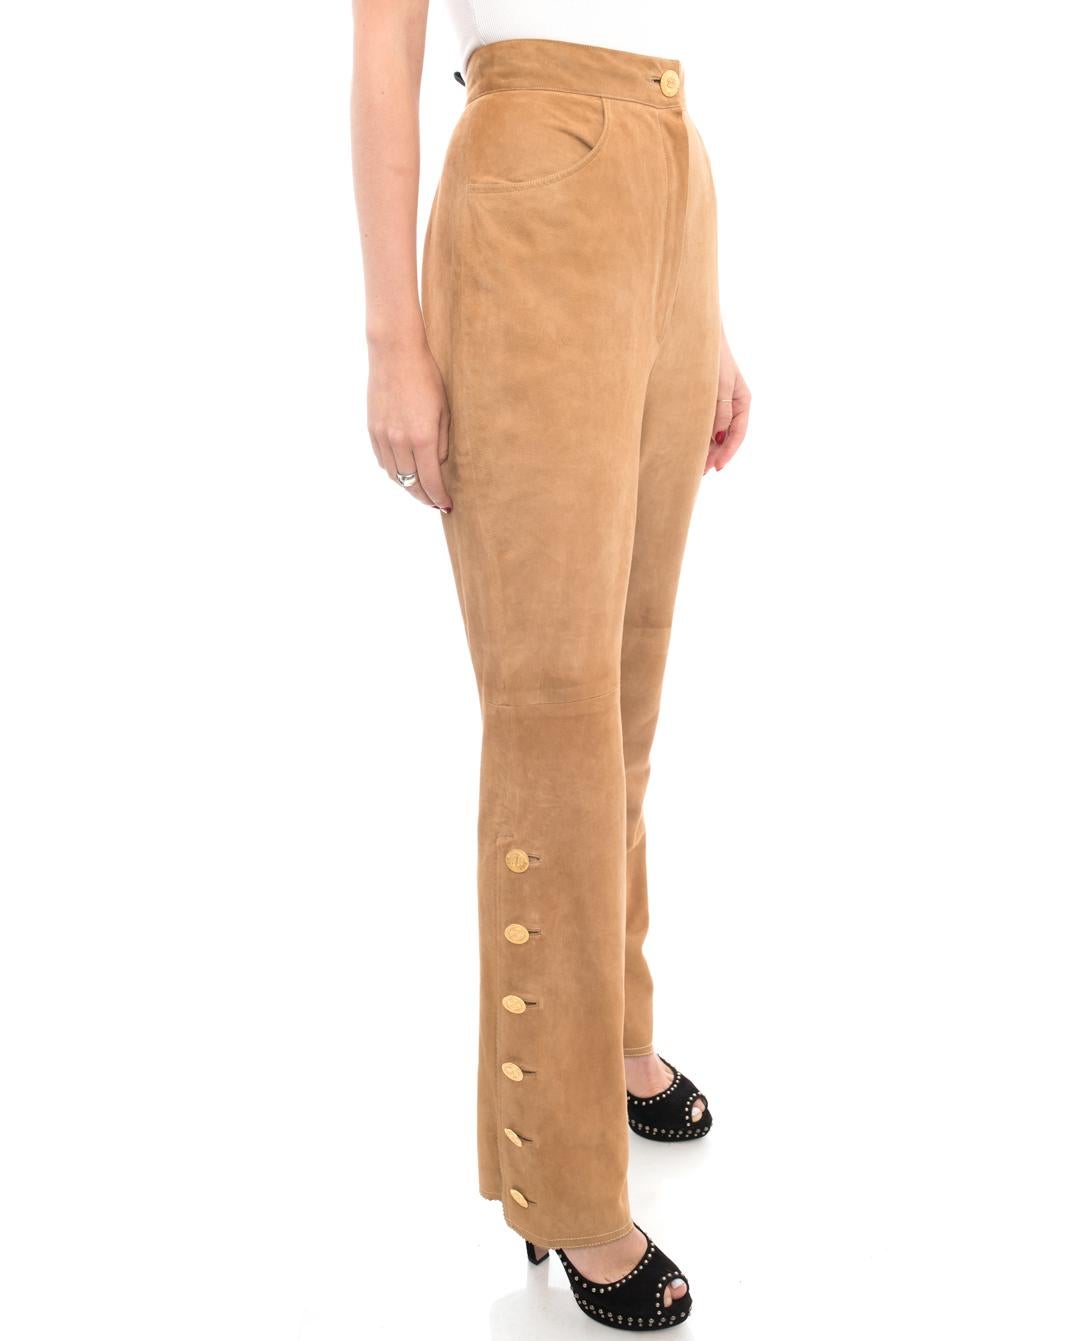 Brown Chanel Vintage 1980’s Tan High Waisted Suede Pants with Buttons - 6